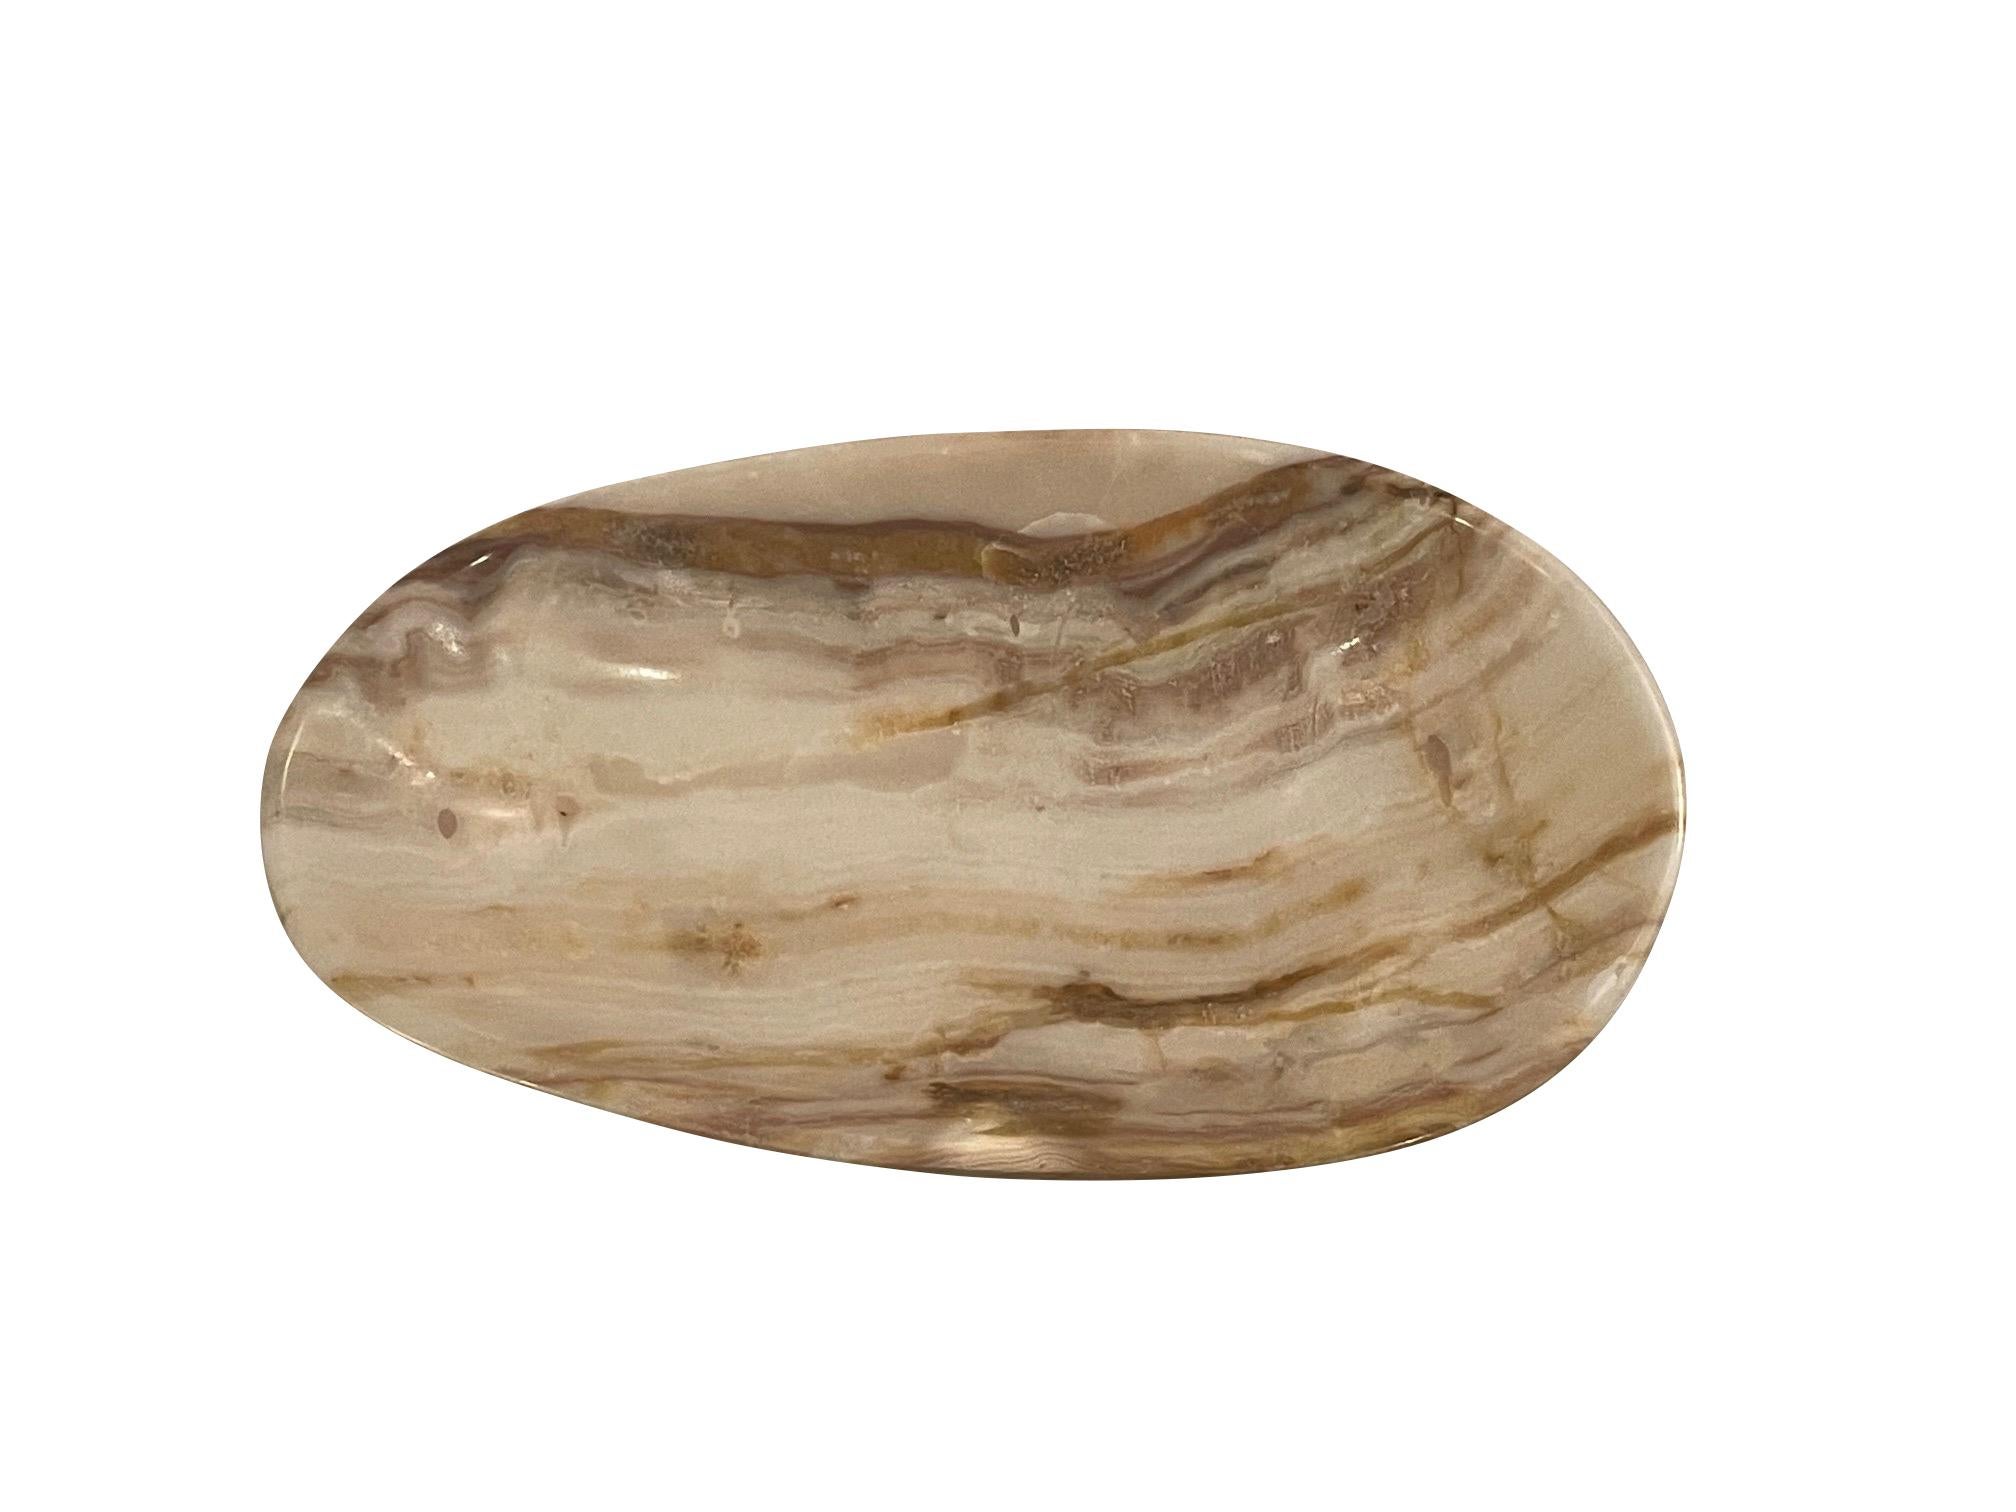 Contemporary Moroccan oval shaped onyx bowl.
Smooth and polished finish.
Horizontal stripes of cream and shades of rust.
From a large collection.